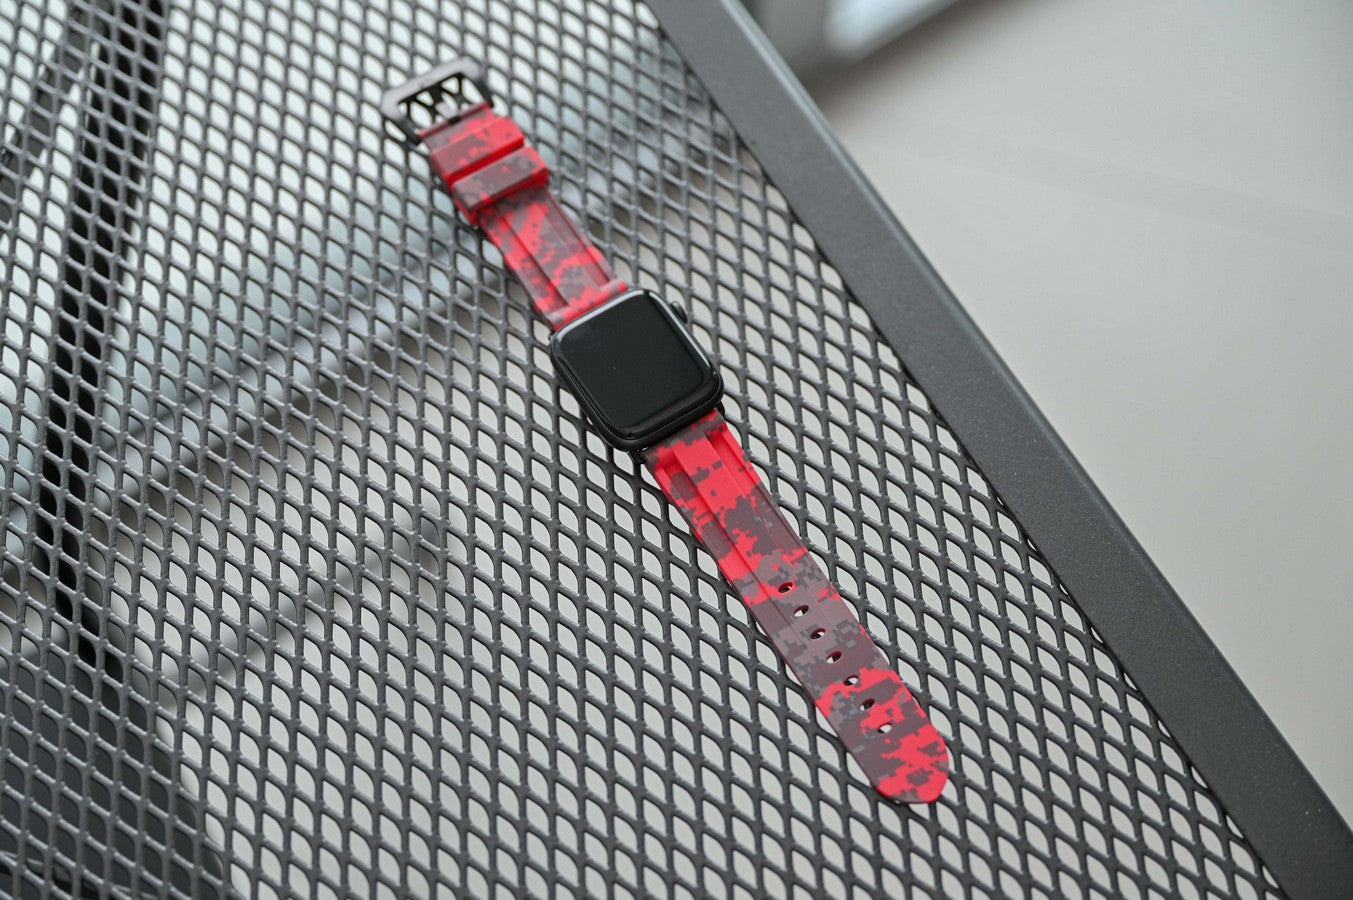 Red Digital Camo Apple Watch Strap - Apple Watch Strap - Le Luxe Straps